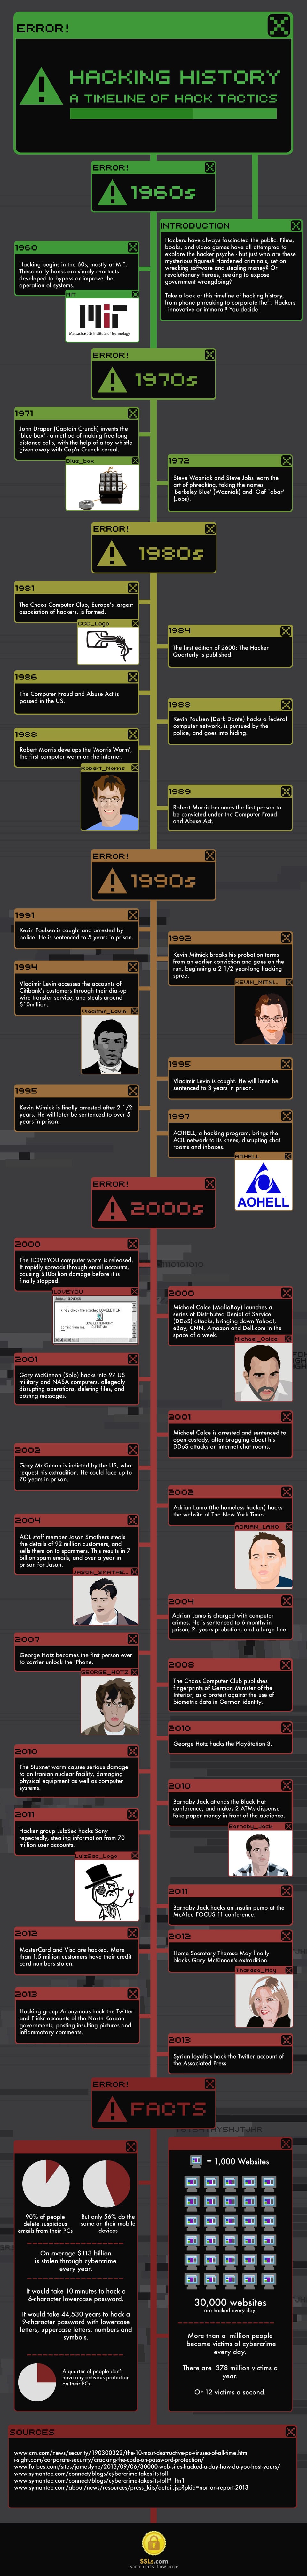 Hacking History – A Timeline Of Hack Tactics [Infographic]